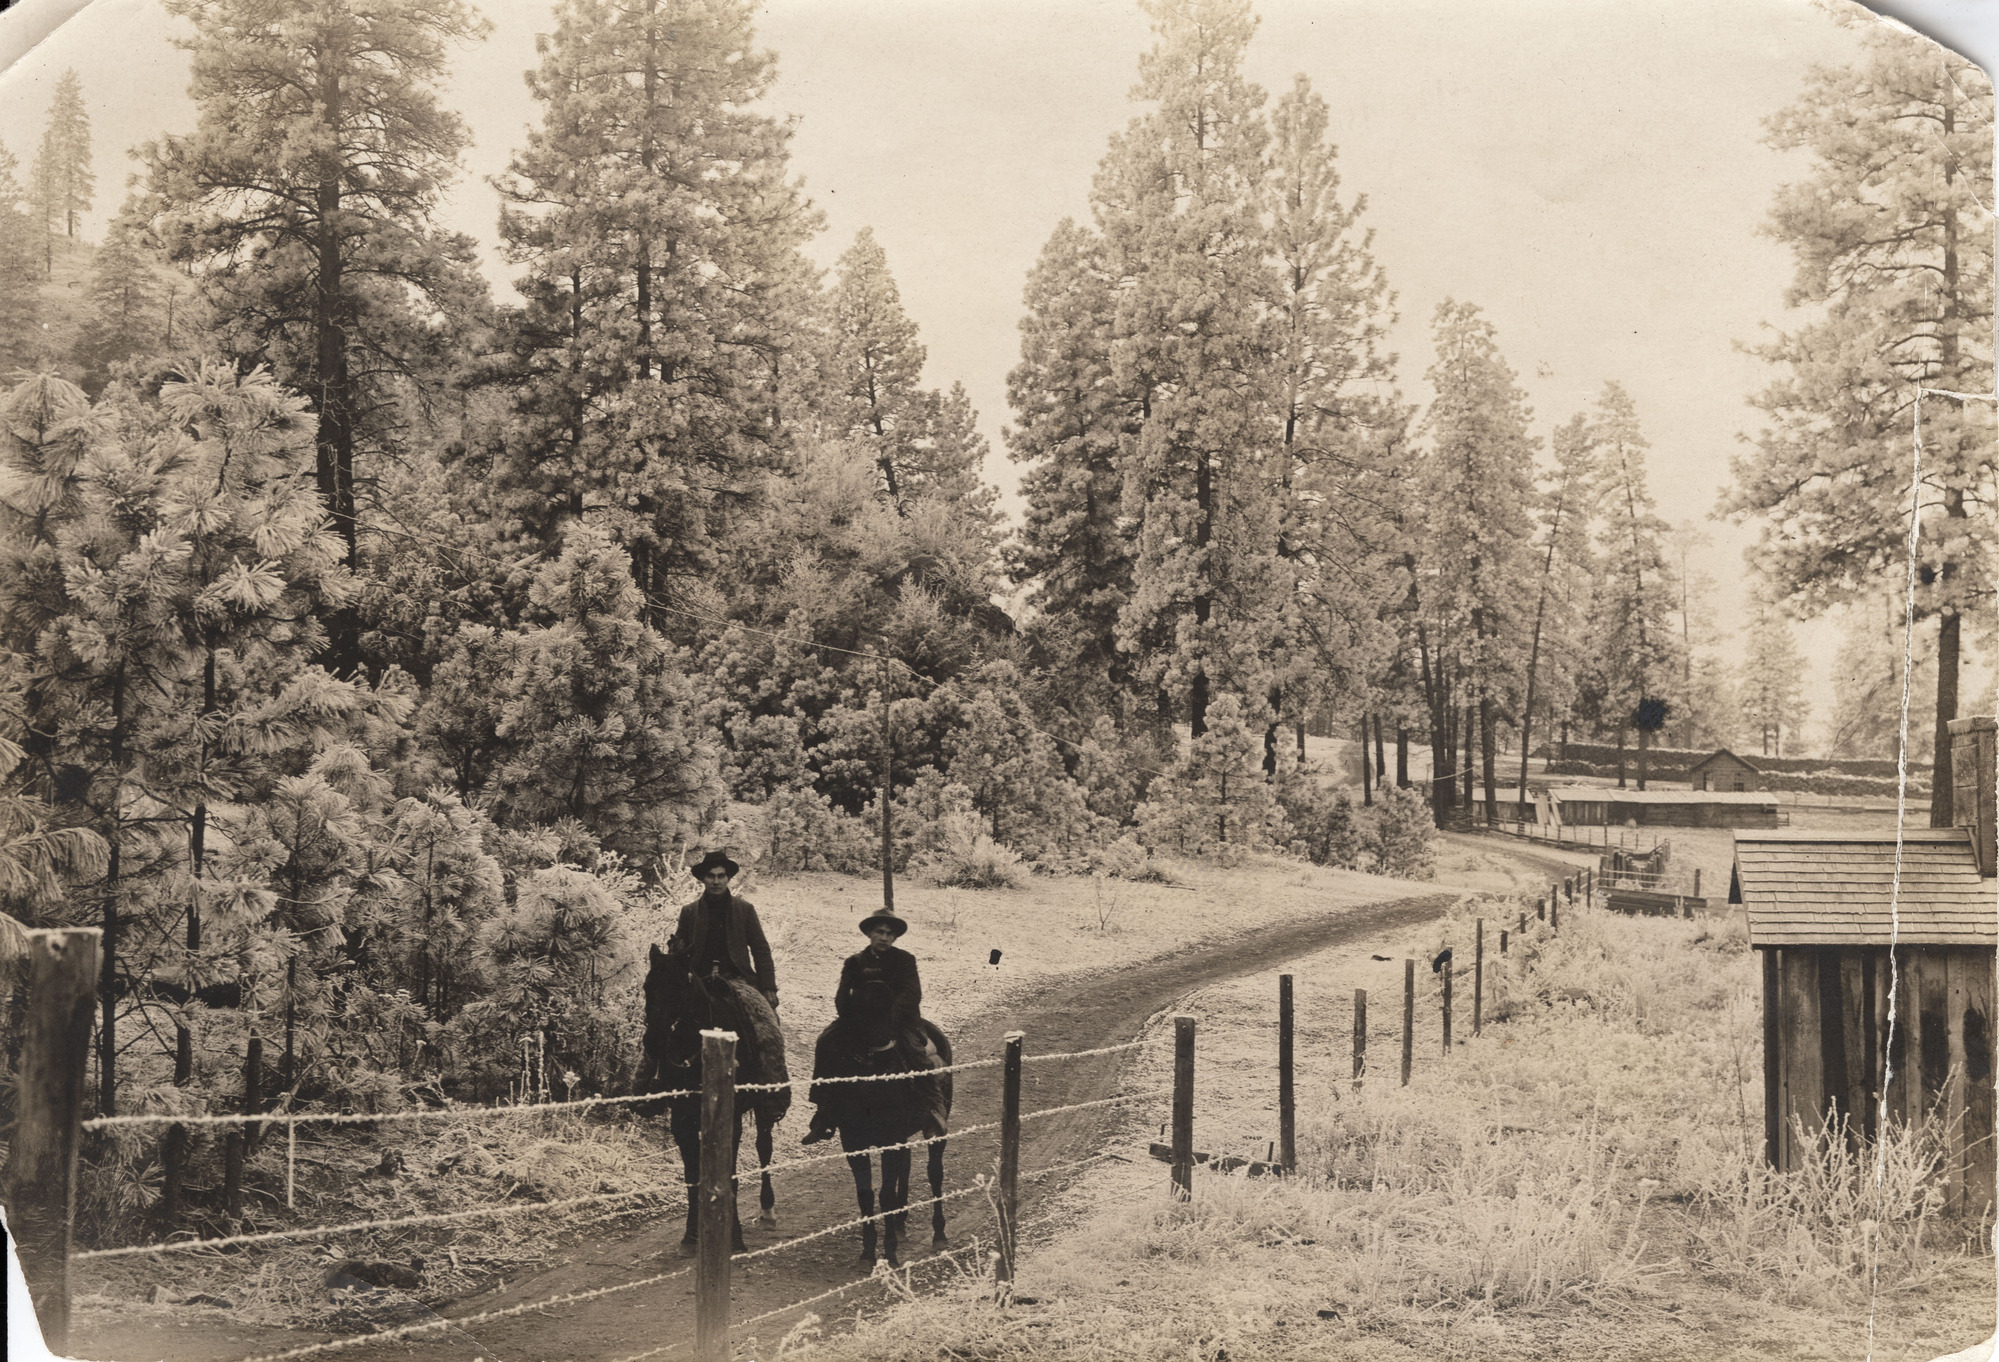 Black and white photograph of a frosty scene with two people on horseback among buildings and trees